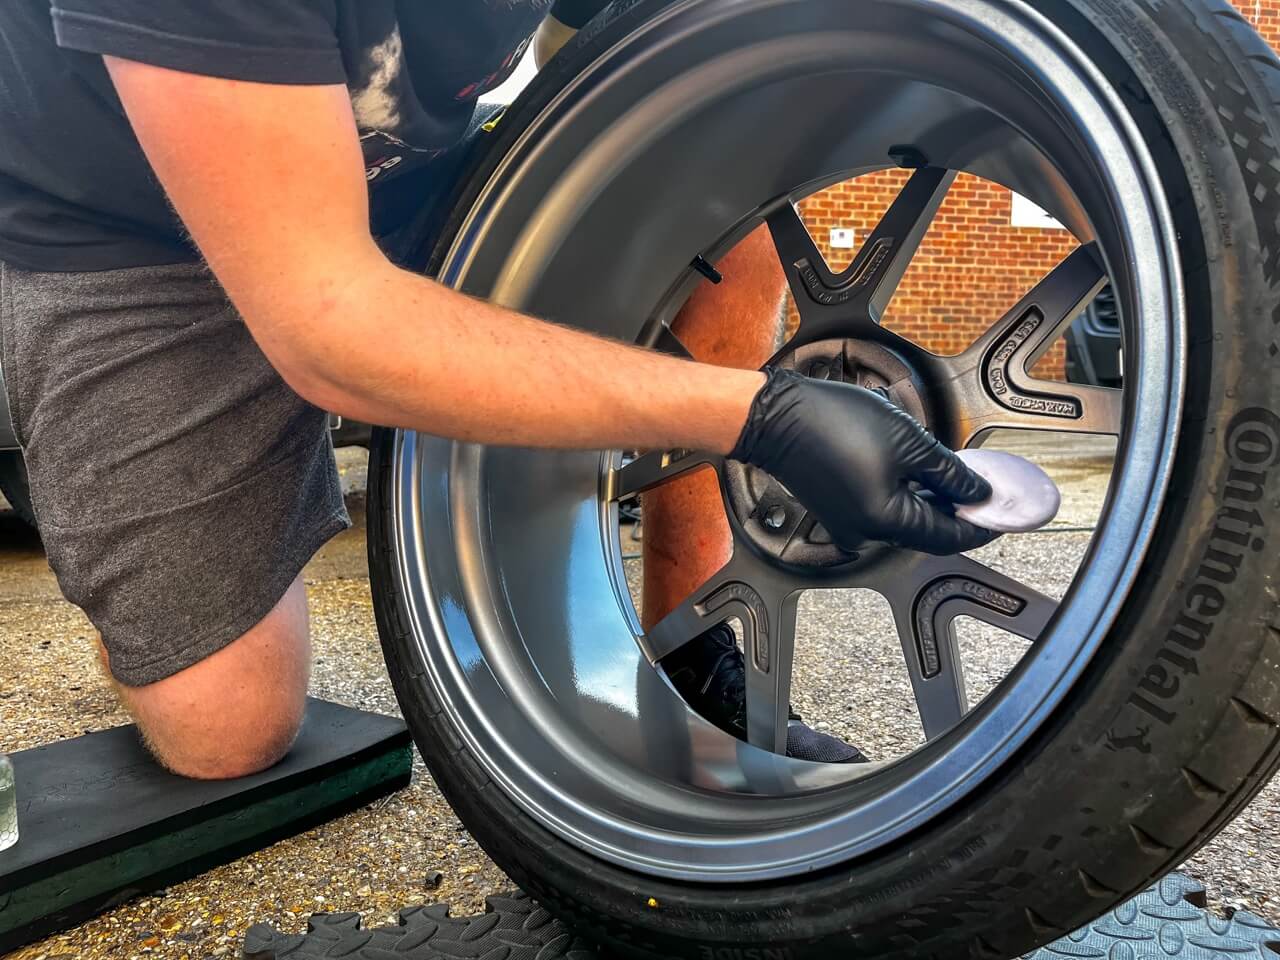 Applying ceramic coating to the inside of the alloy wheel with an applicator pad